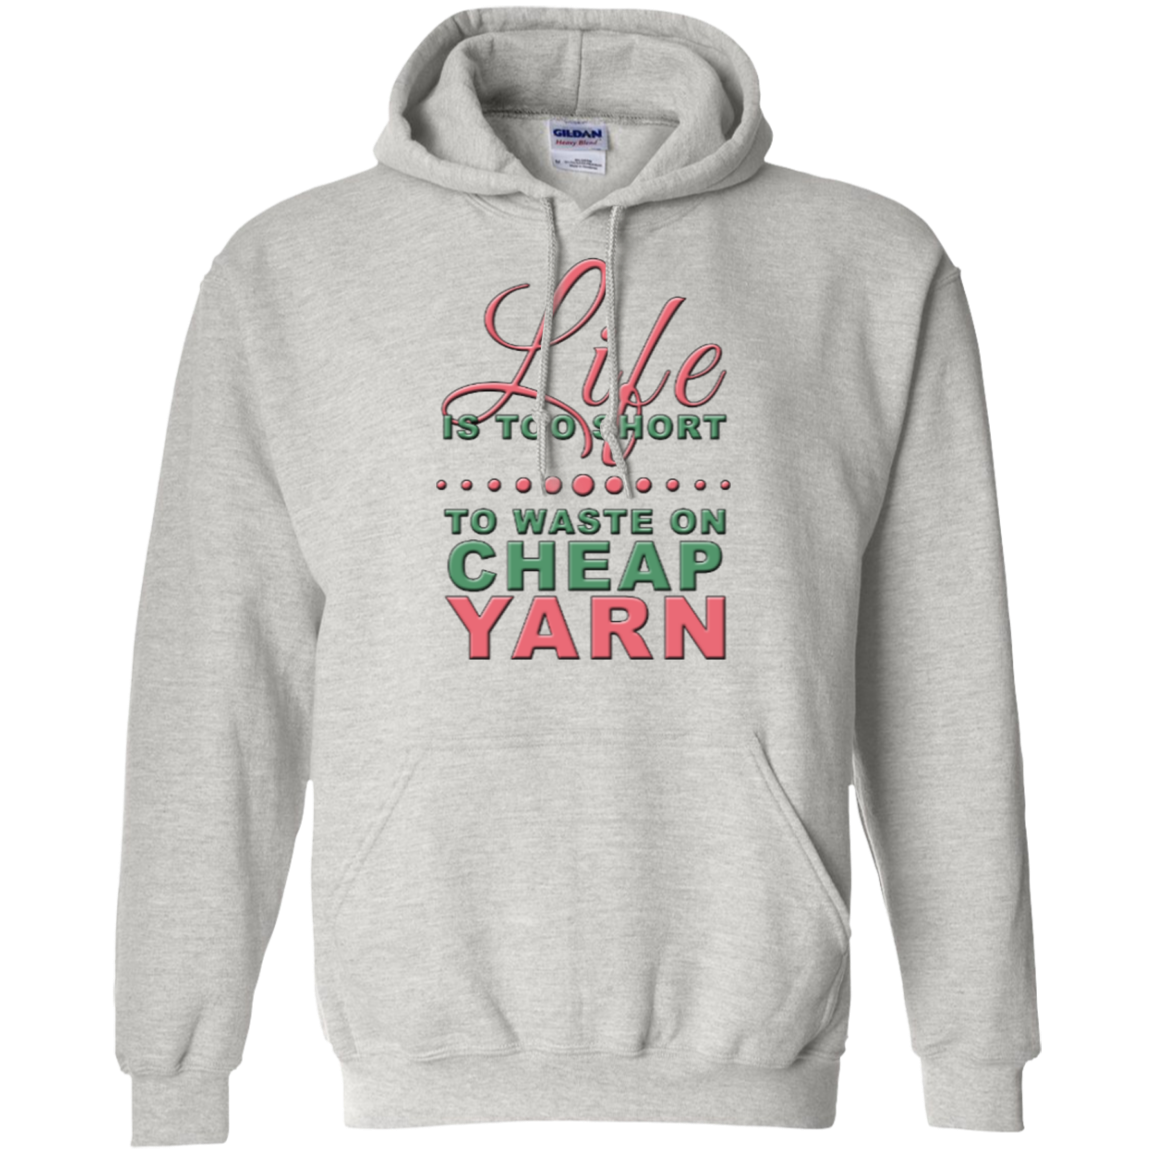 Life is Too Short to Use Cheap Yarn Pullover Hoodies - Crafter4Life - 2